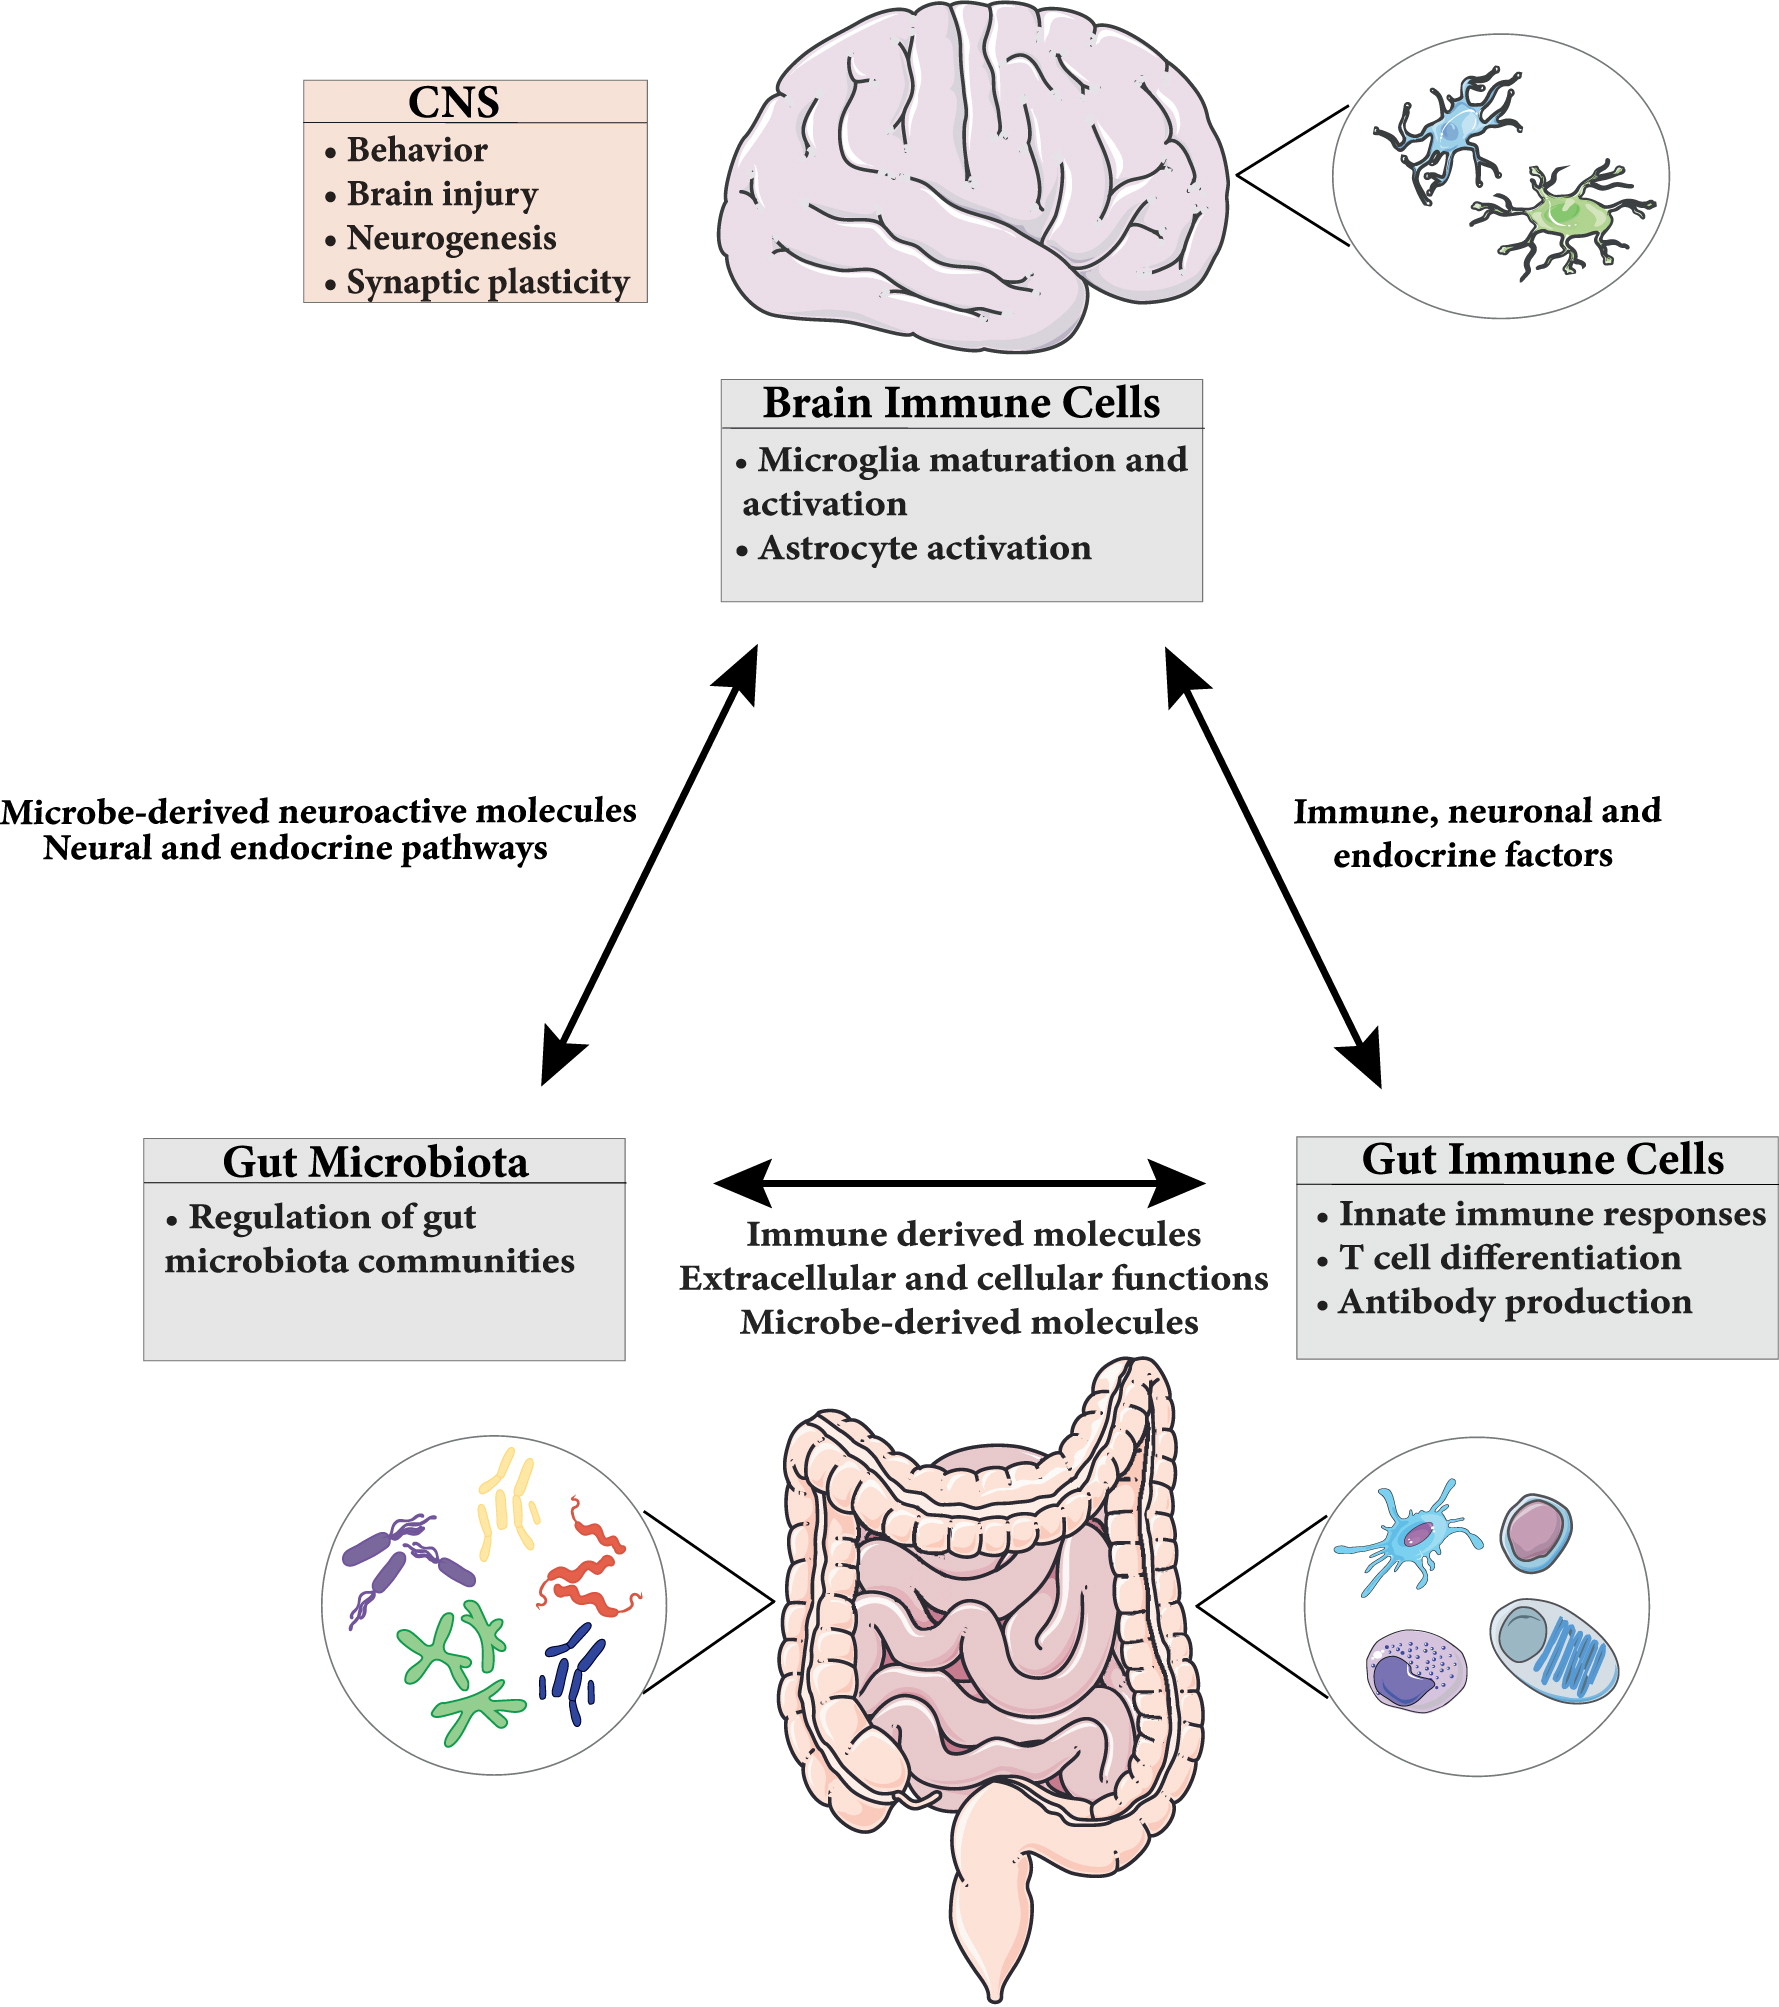 microbiota-immune-interactions-from-gut-to-brain